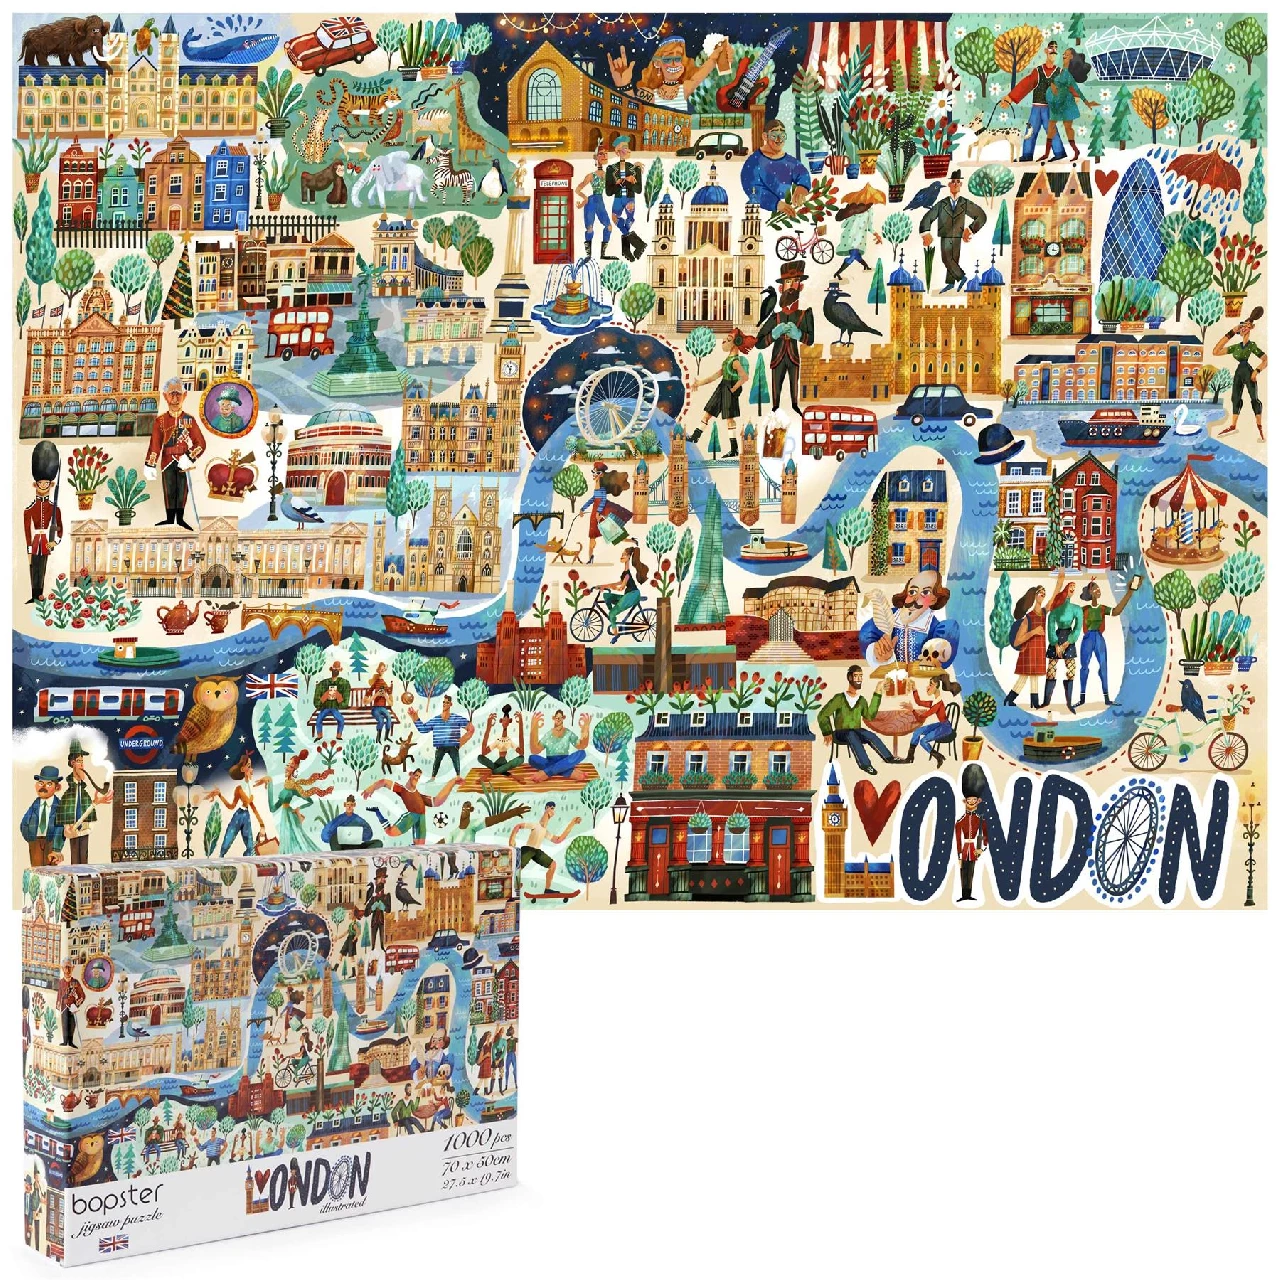 bopster 1000 Piece Jigsaw Puzzle London City Illustrated 100% Recycled Card for Adults Teens and Kids 70 x 50cm